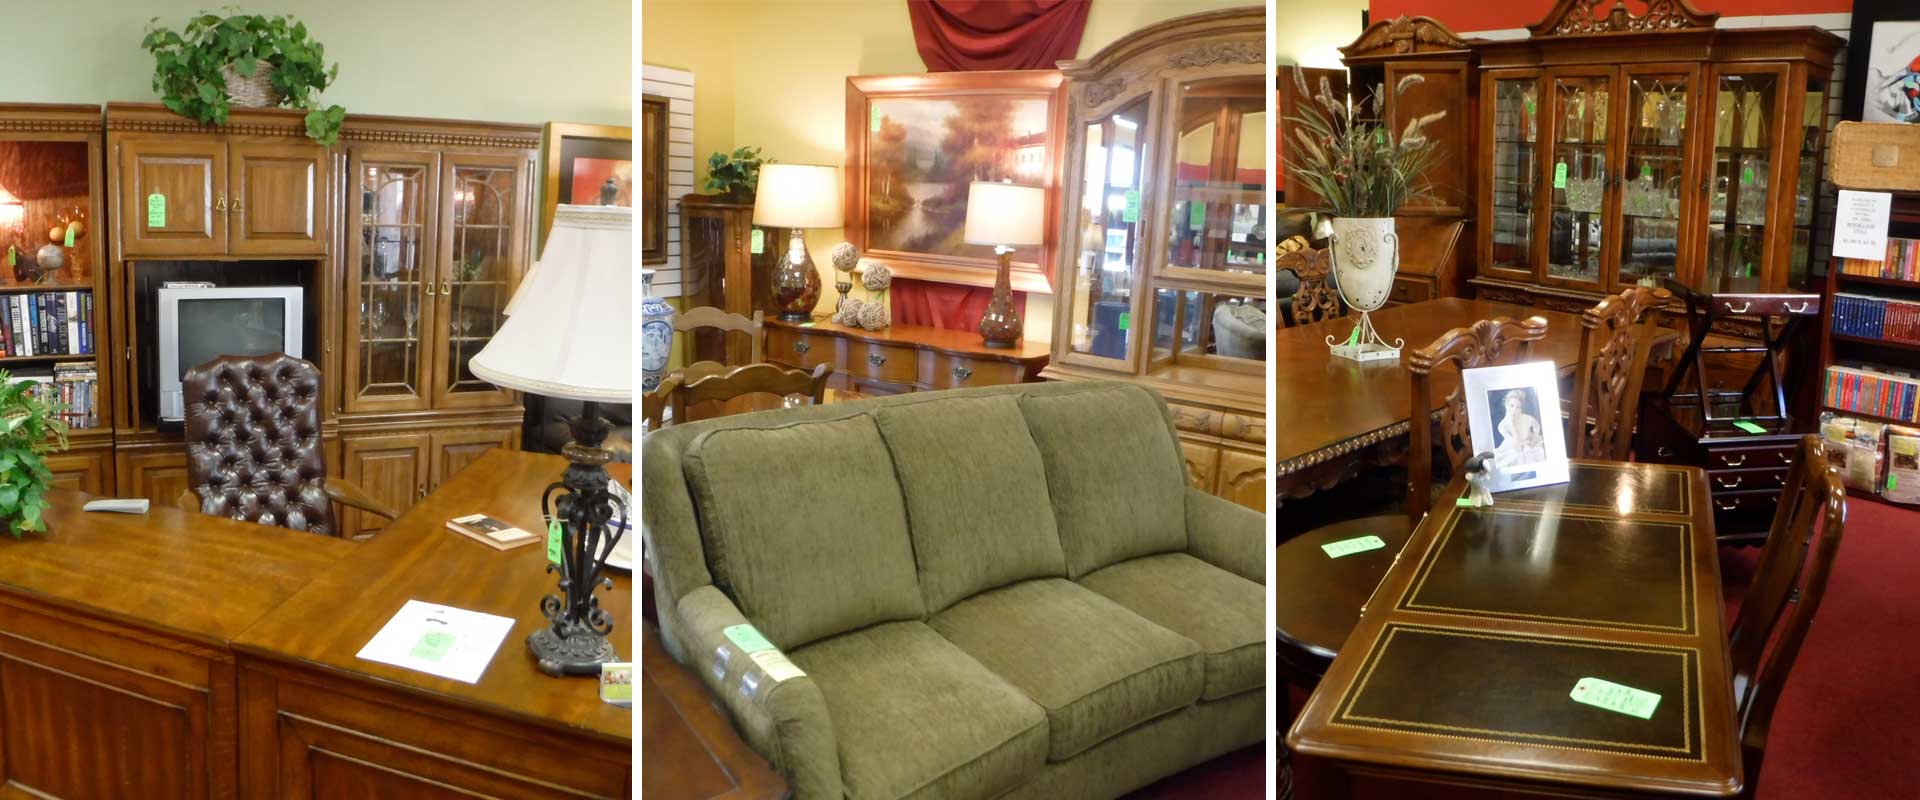 Consignment Furniture Sioux Falls Sd Resale Living